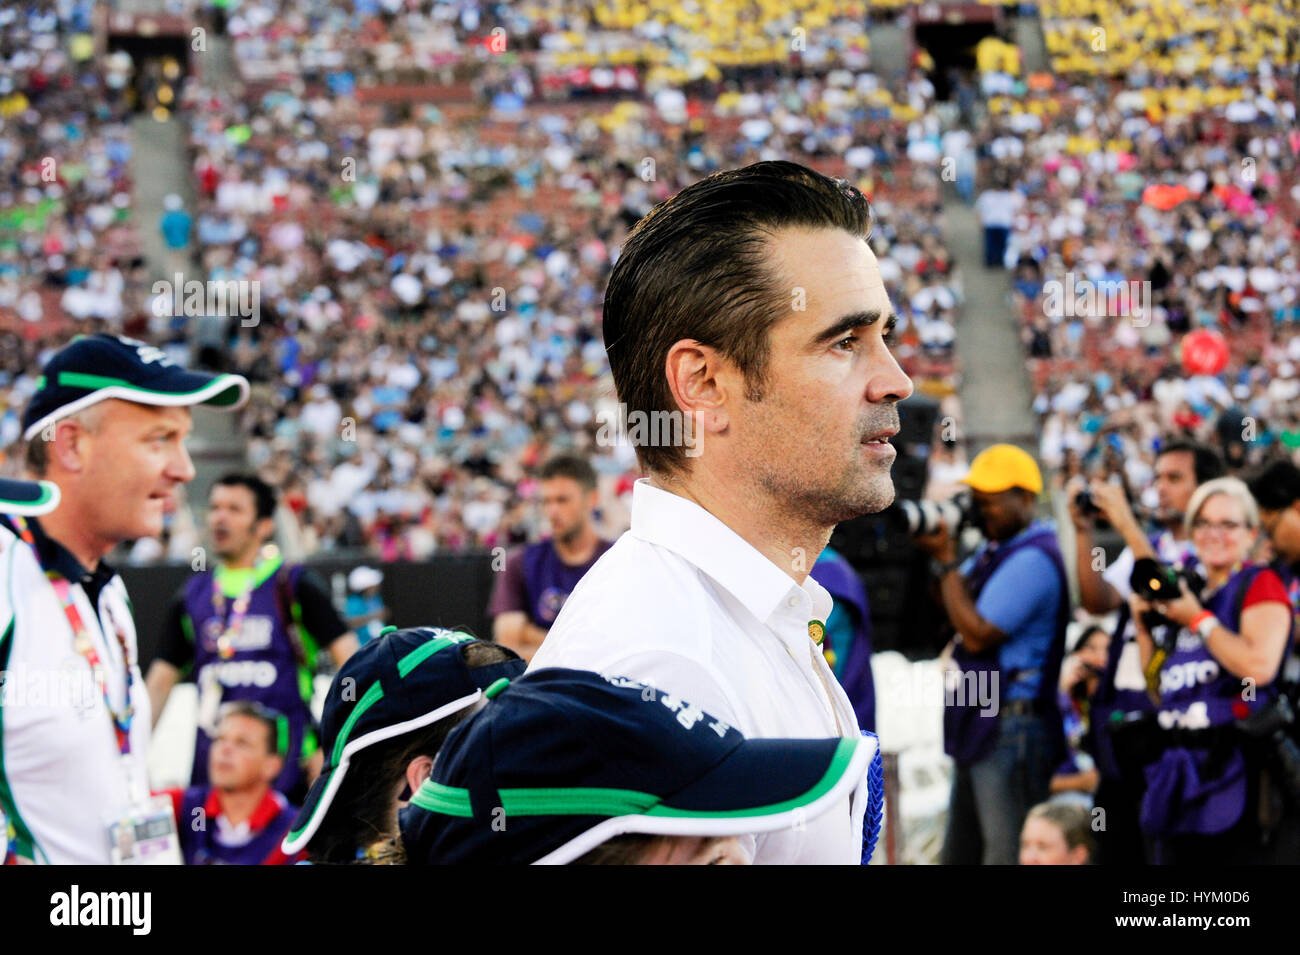 Colin Farrell attends the Special Olympics World Games Opening Ceremony at the Coliseum on July 25th, 2015 in Los Angeles, California. Stock Photo